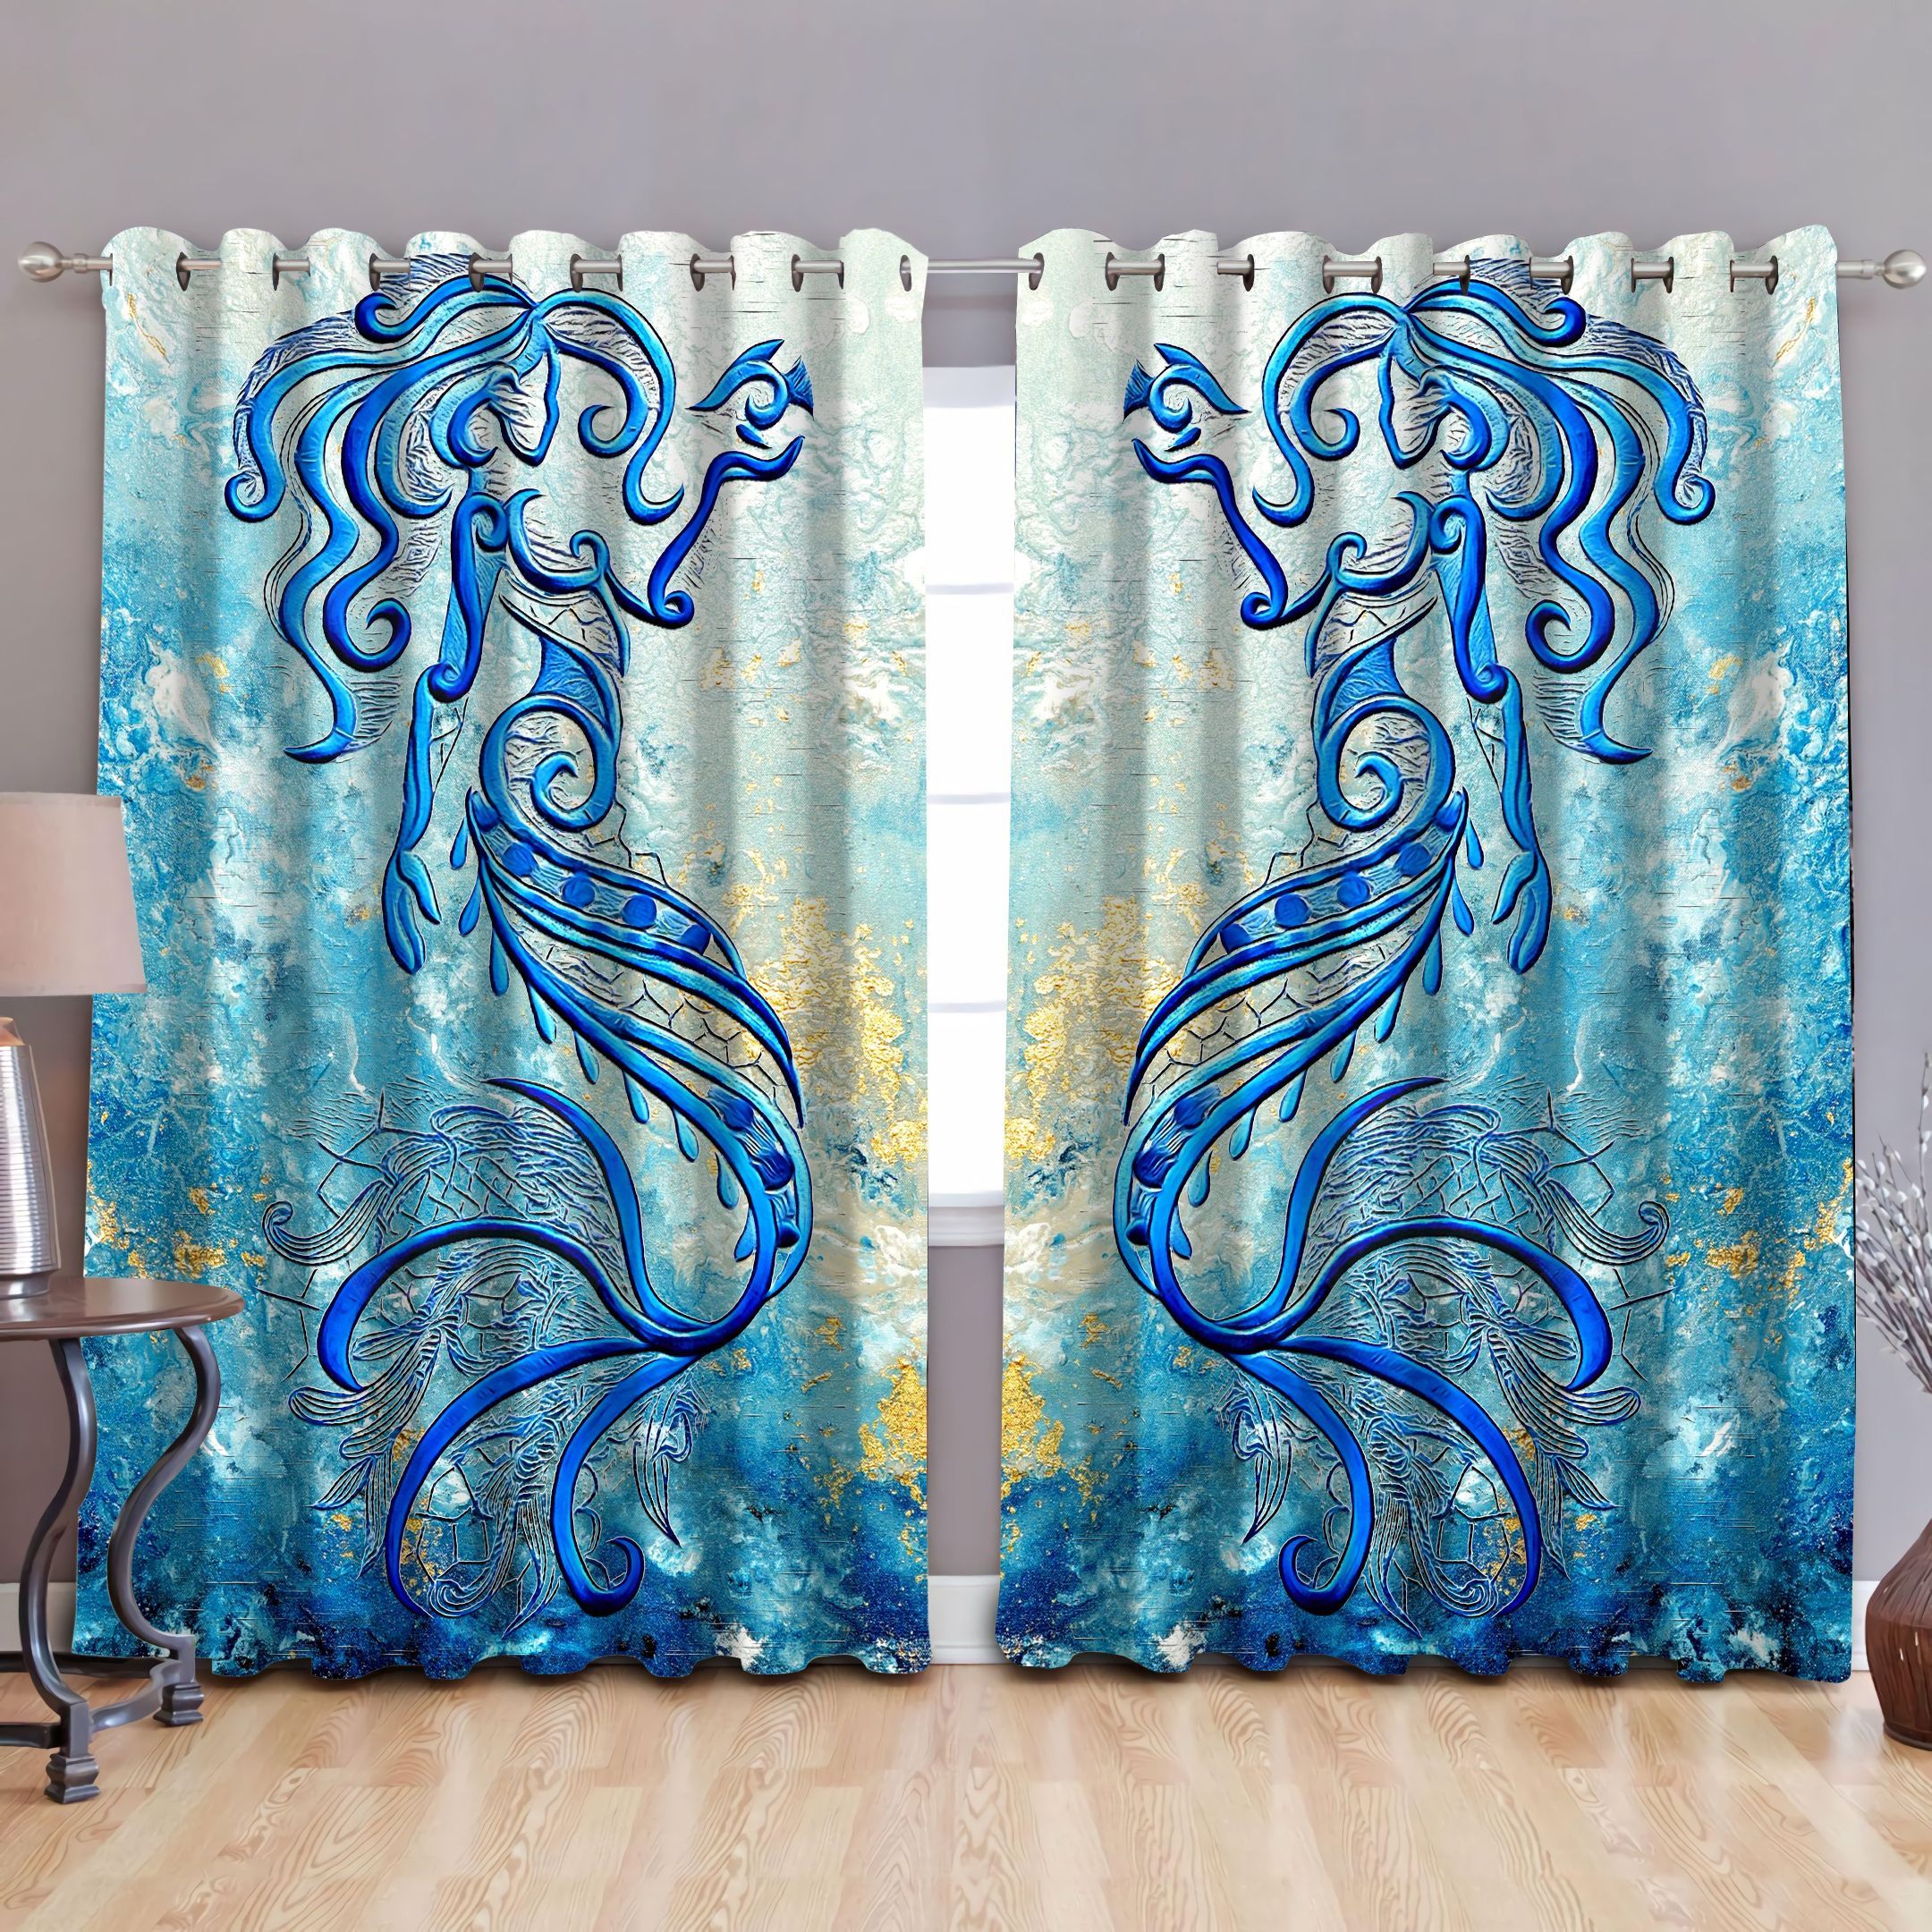 Be A Mermaid And Make Waves Window Curtains Home Decor